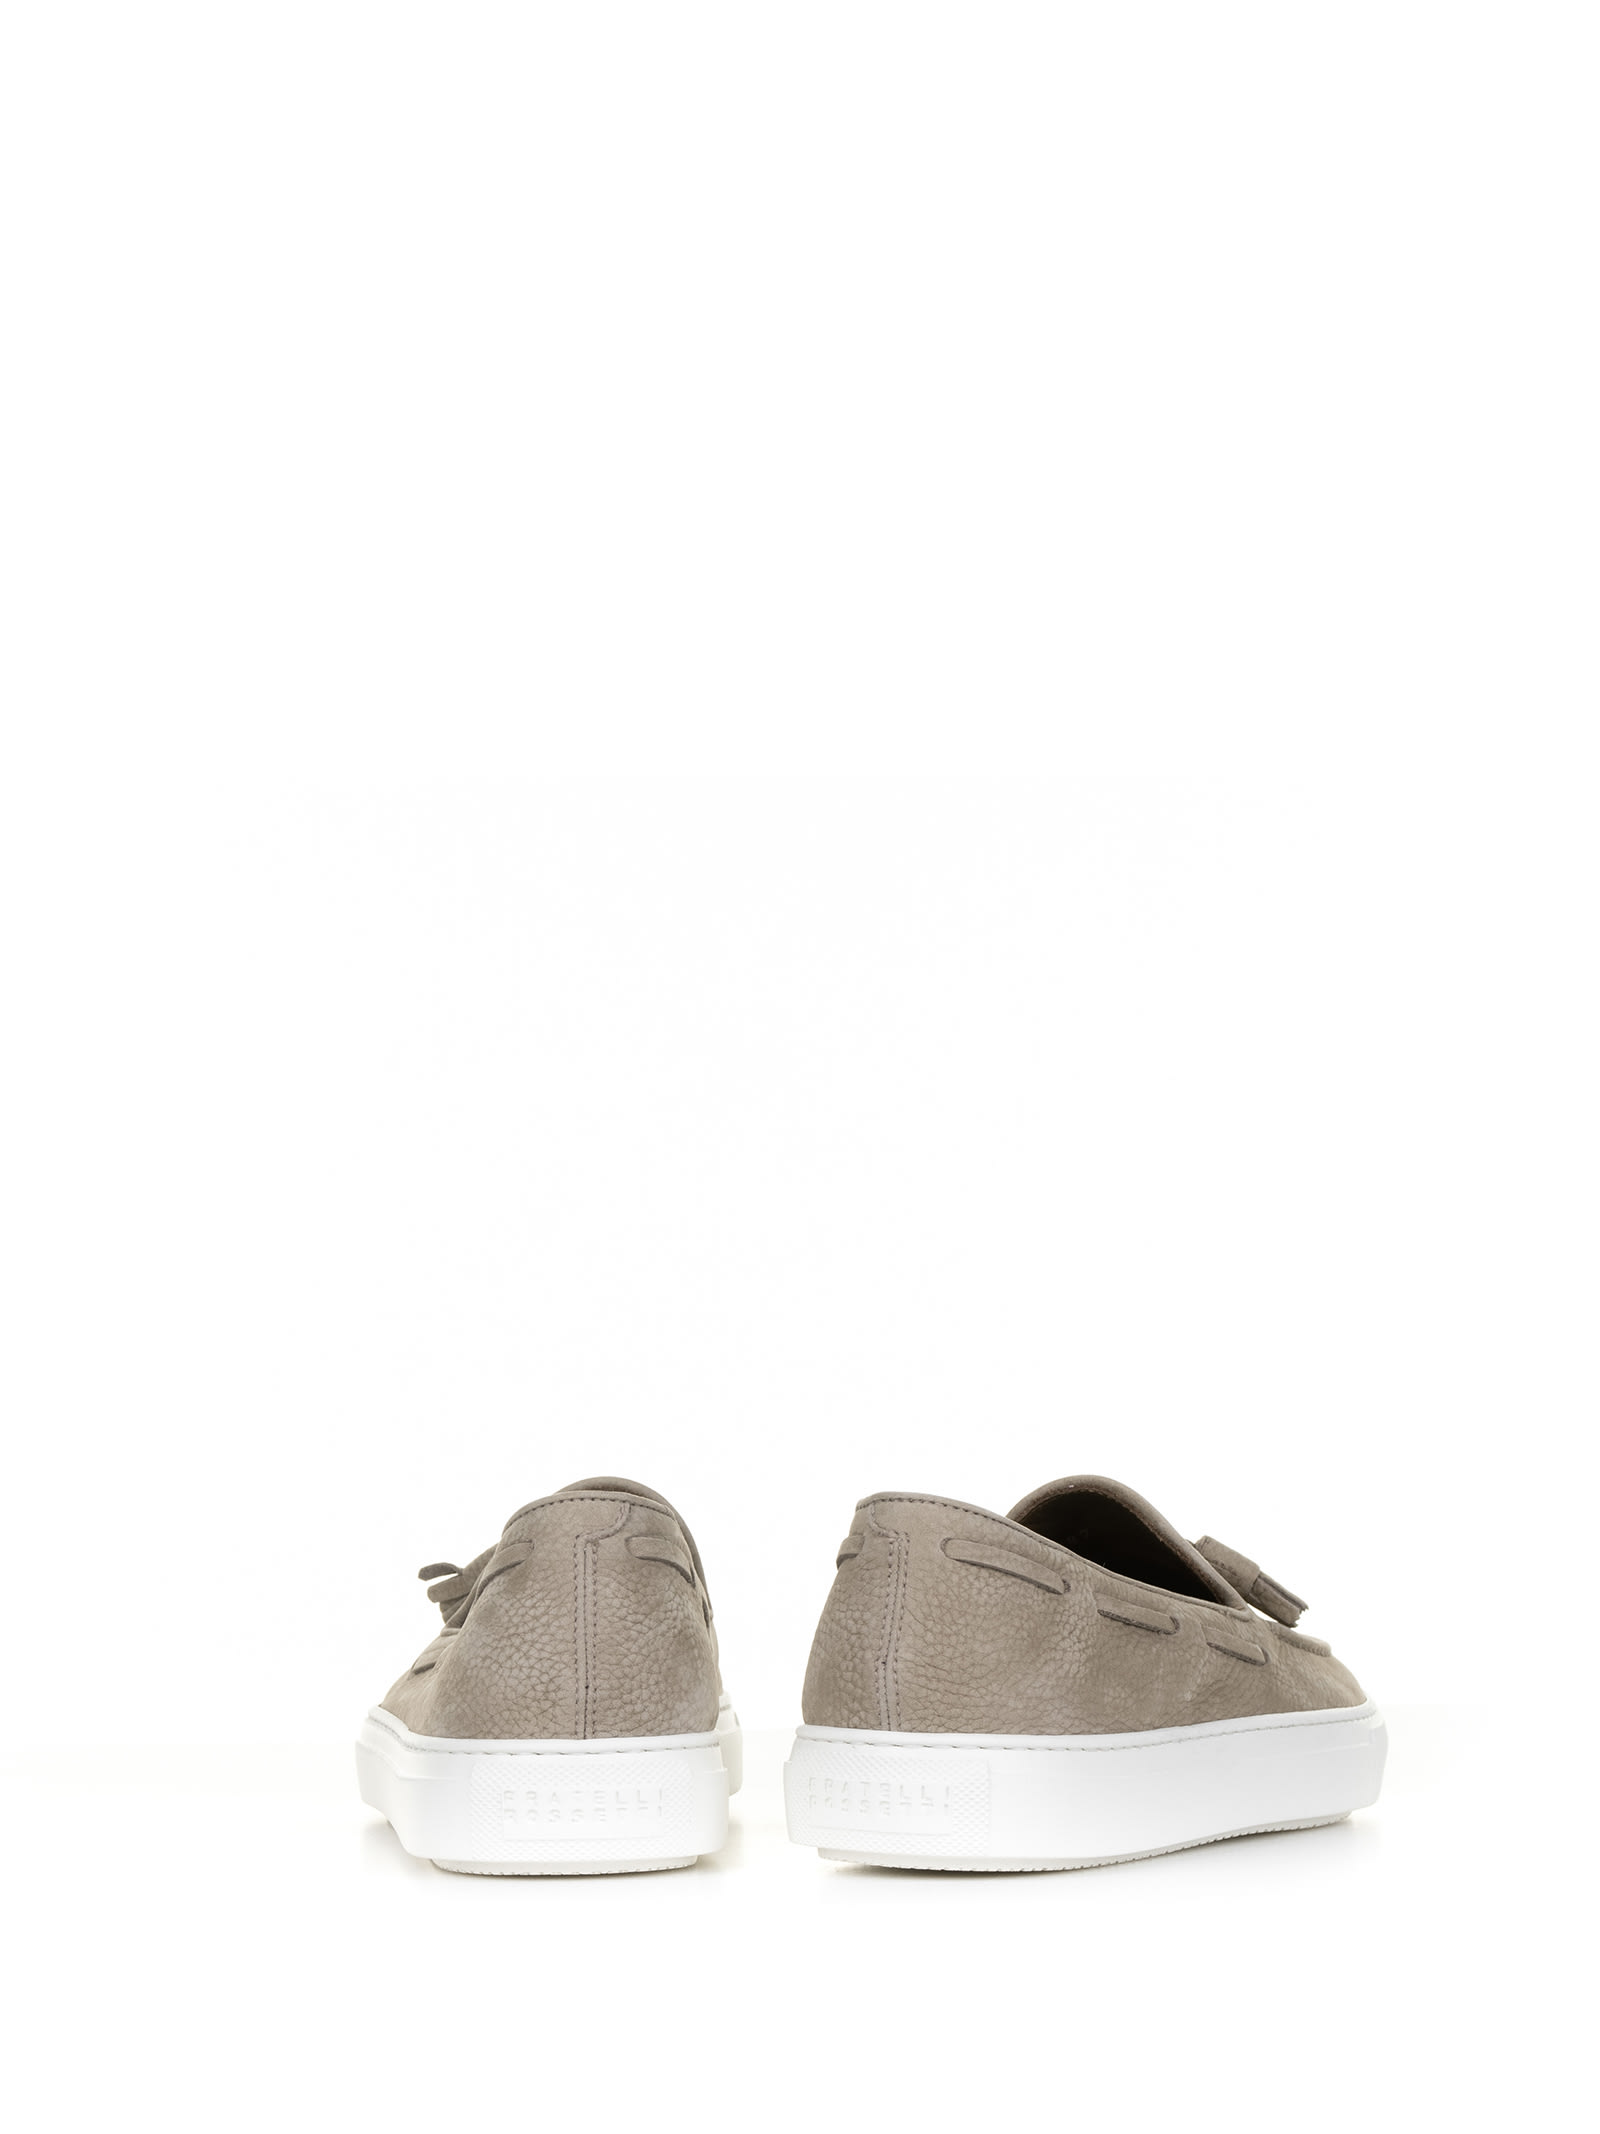 Shop Fratelli Rossetti One Moccasin In Beige Suede And Rubber Sole In Corda